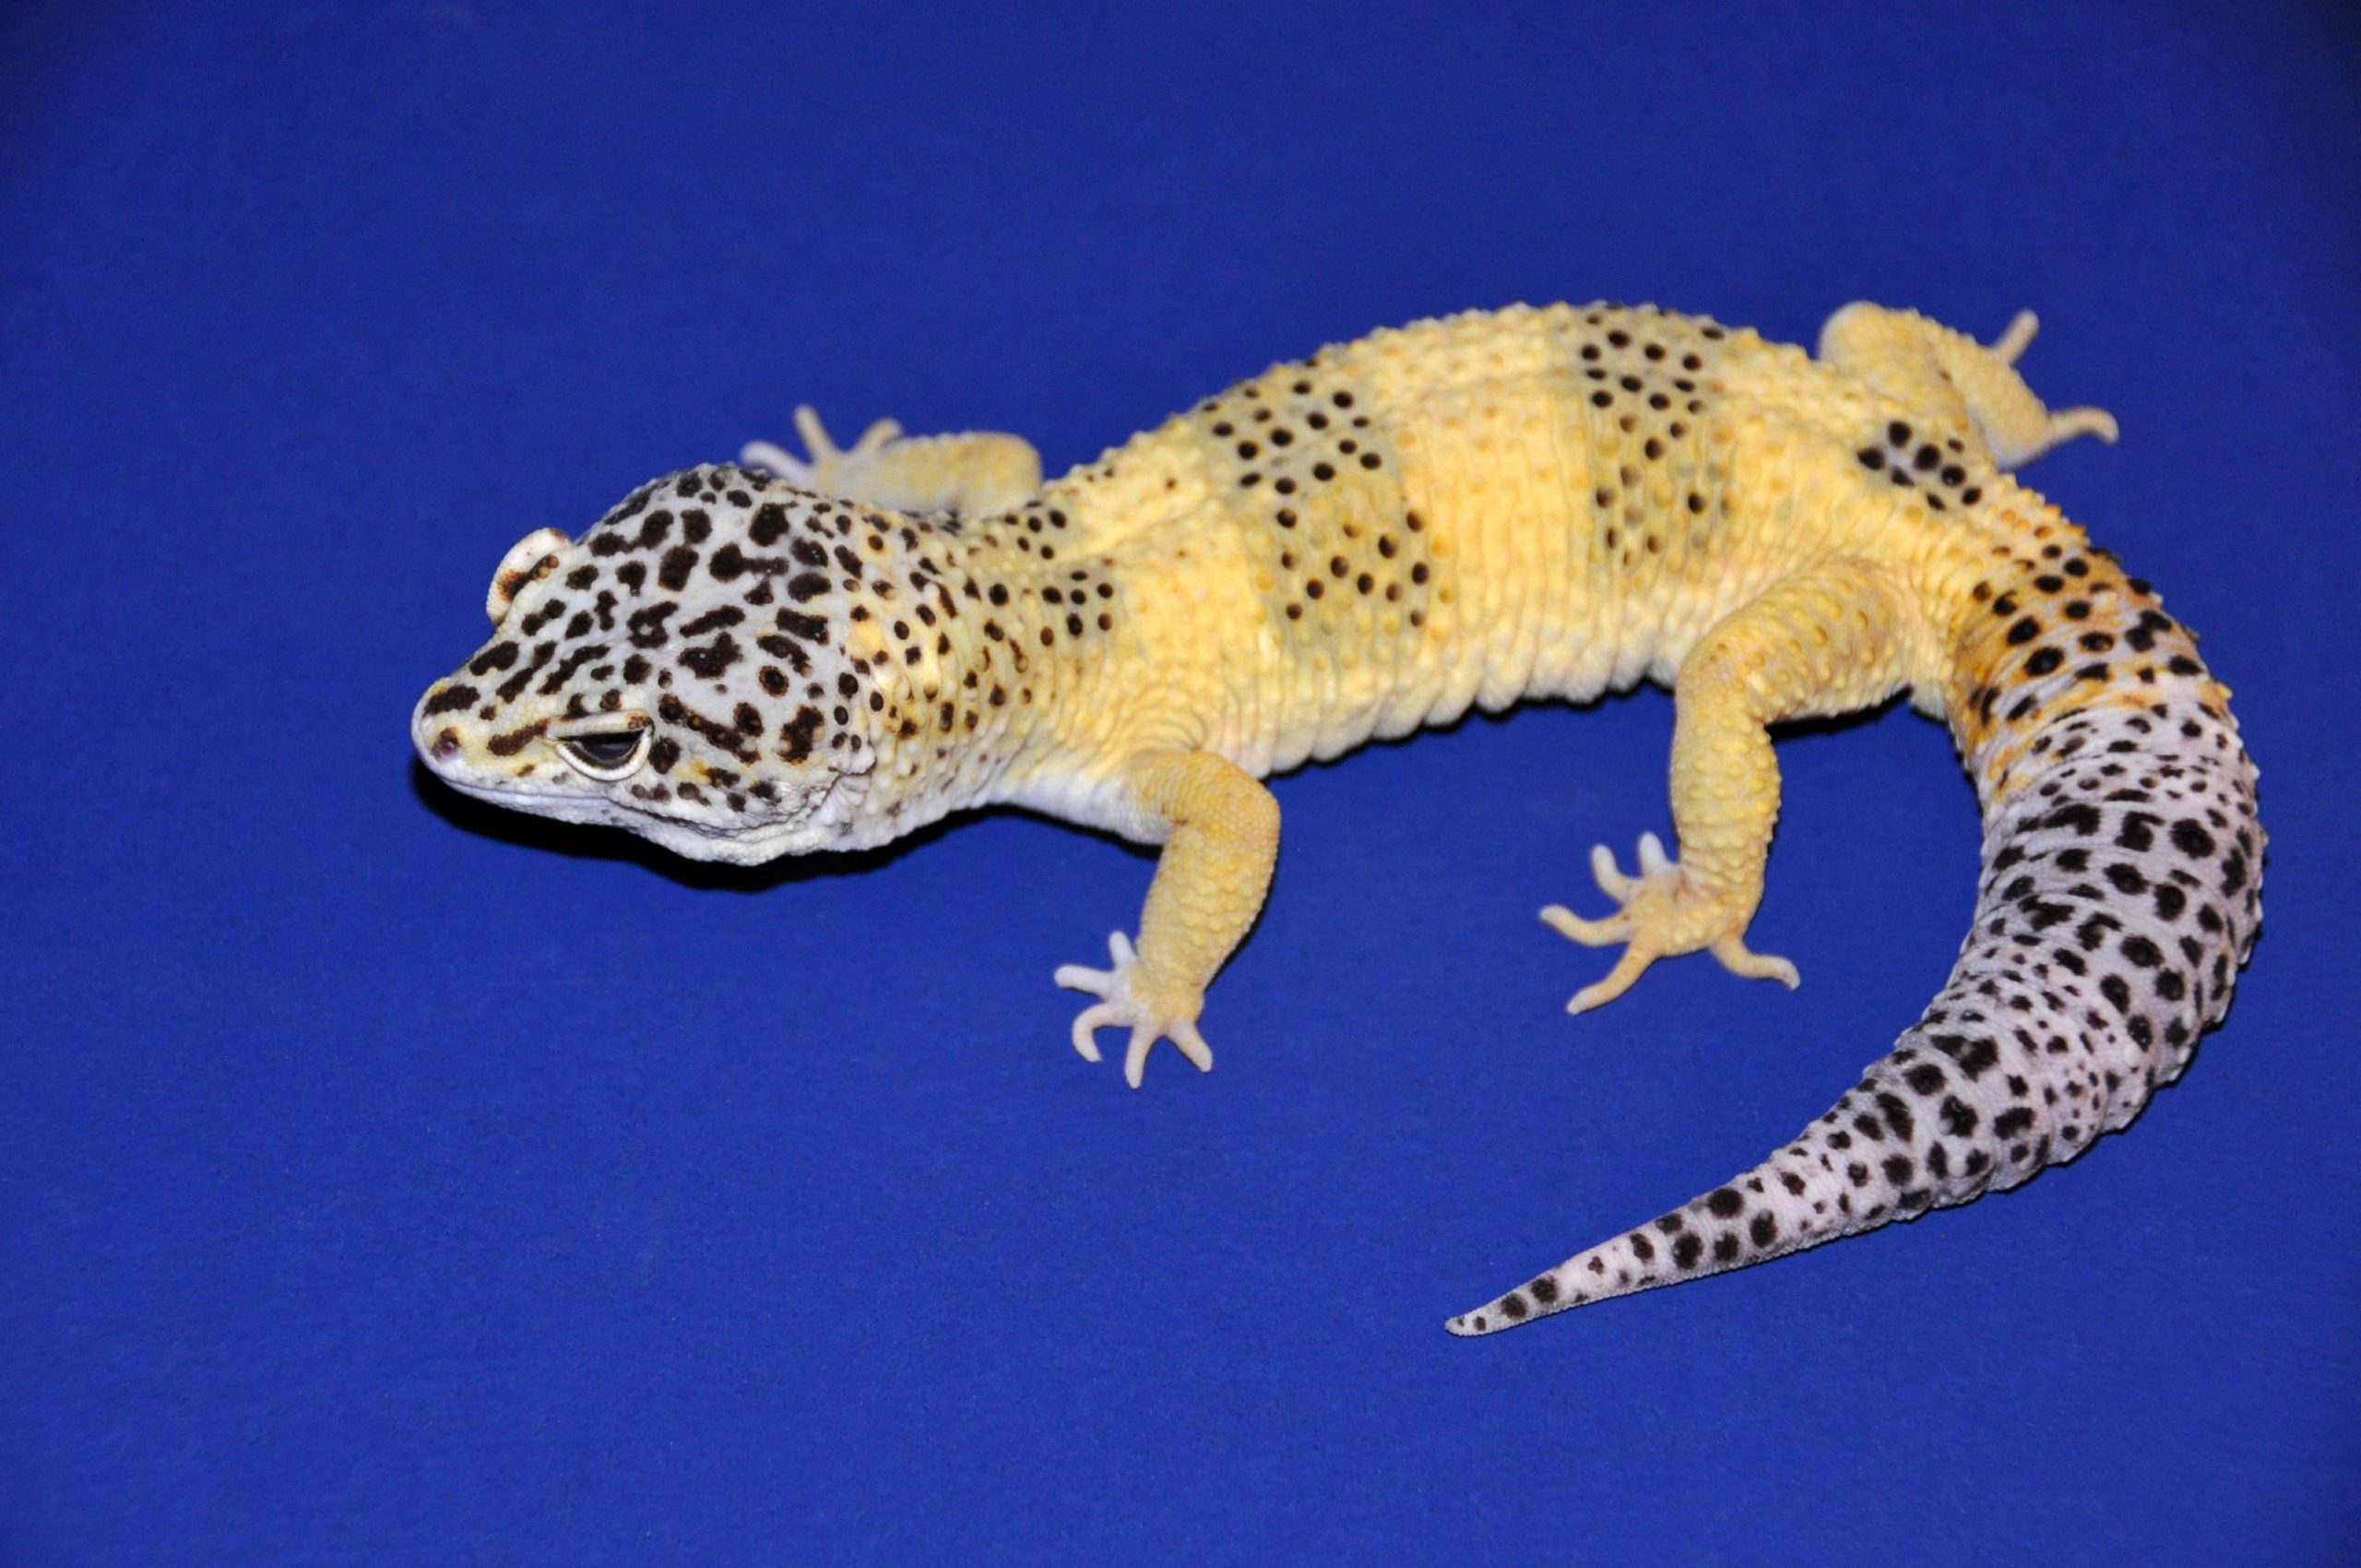 A California reptile shop began breeding Mr. Frosty in 2016 and produced a ...